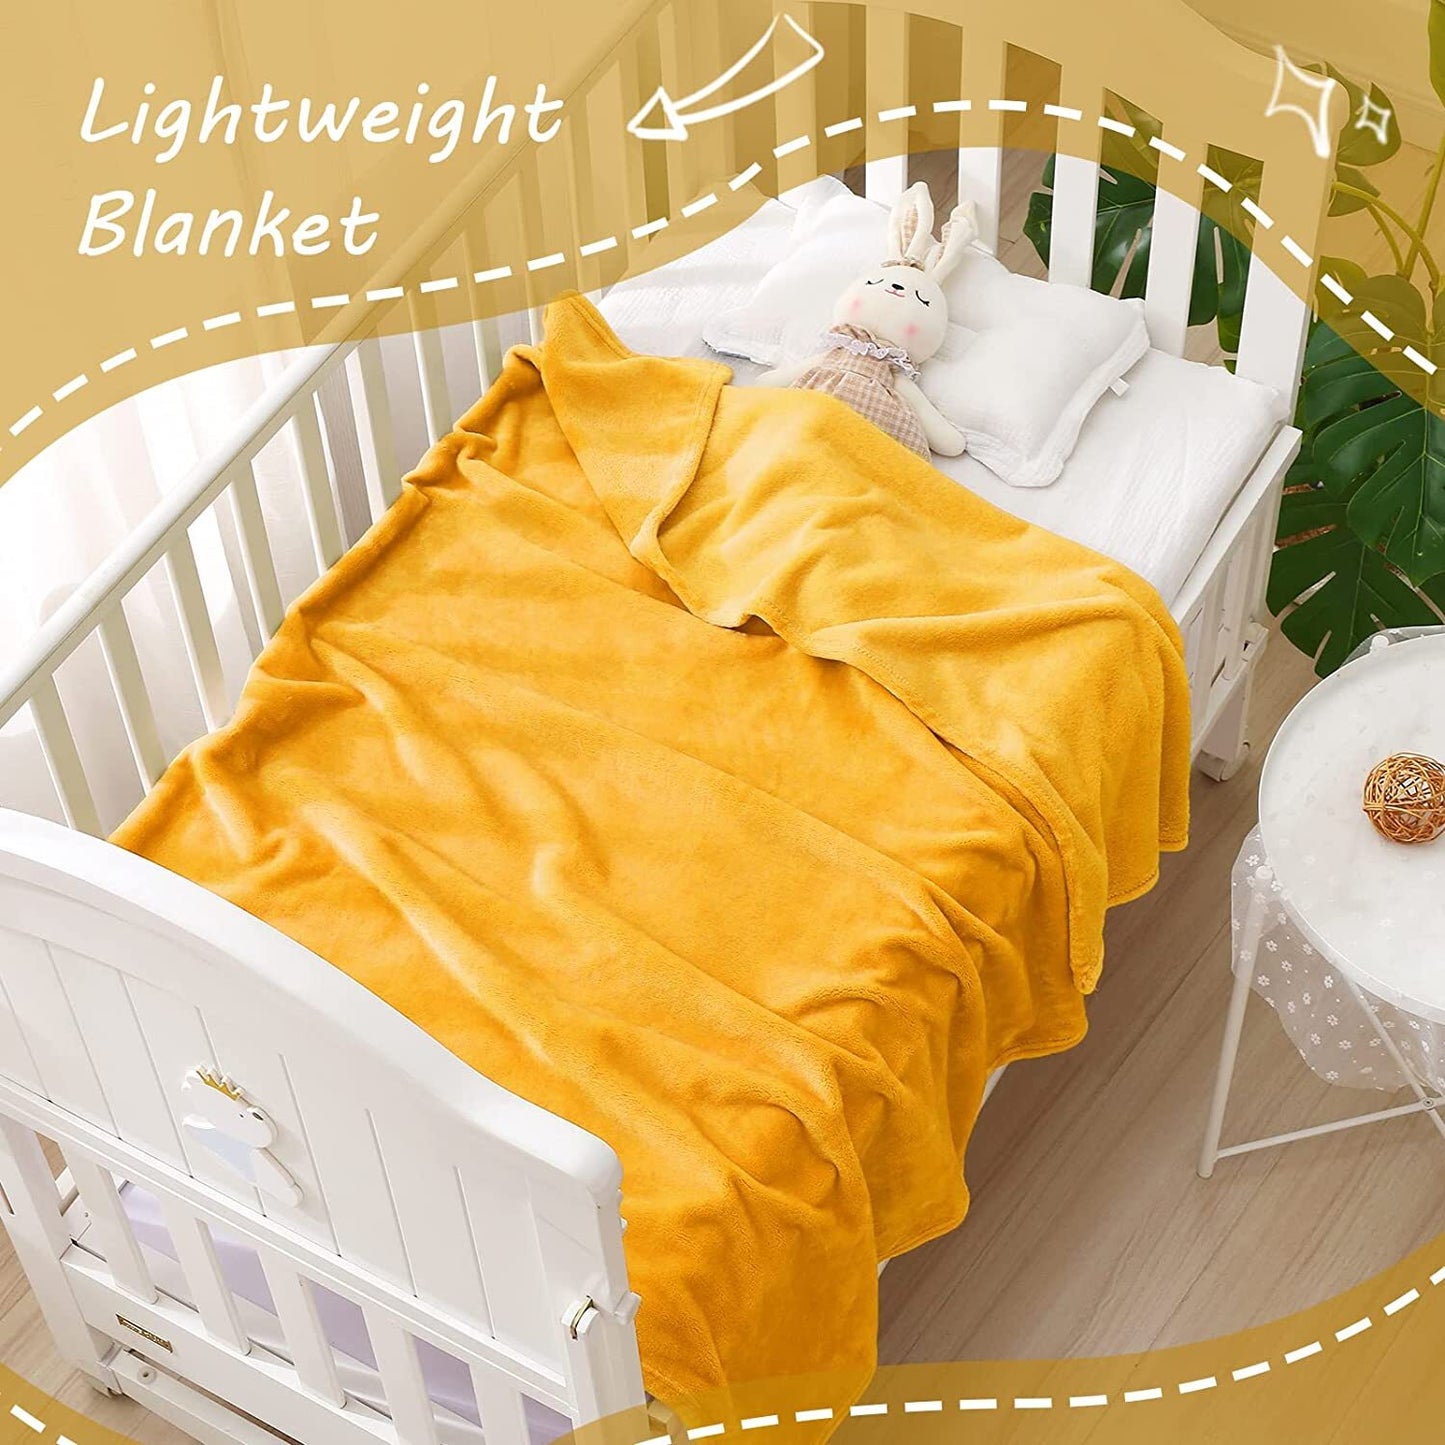 Exclusivo Mezcla Soft Lightweight Fleece Baby Blanket Throw Blanket for Boys, Girls, Toddler and Kids Nap Blankets for Crib Bedding, Nursery, and Security (40x50 inches, Mustard Yellow)